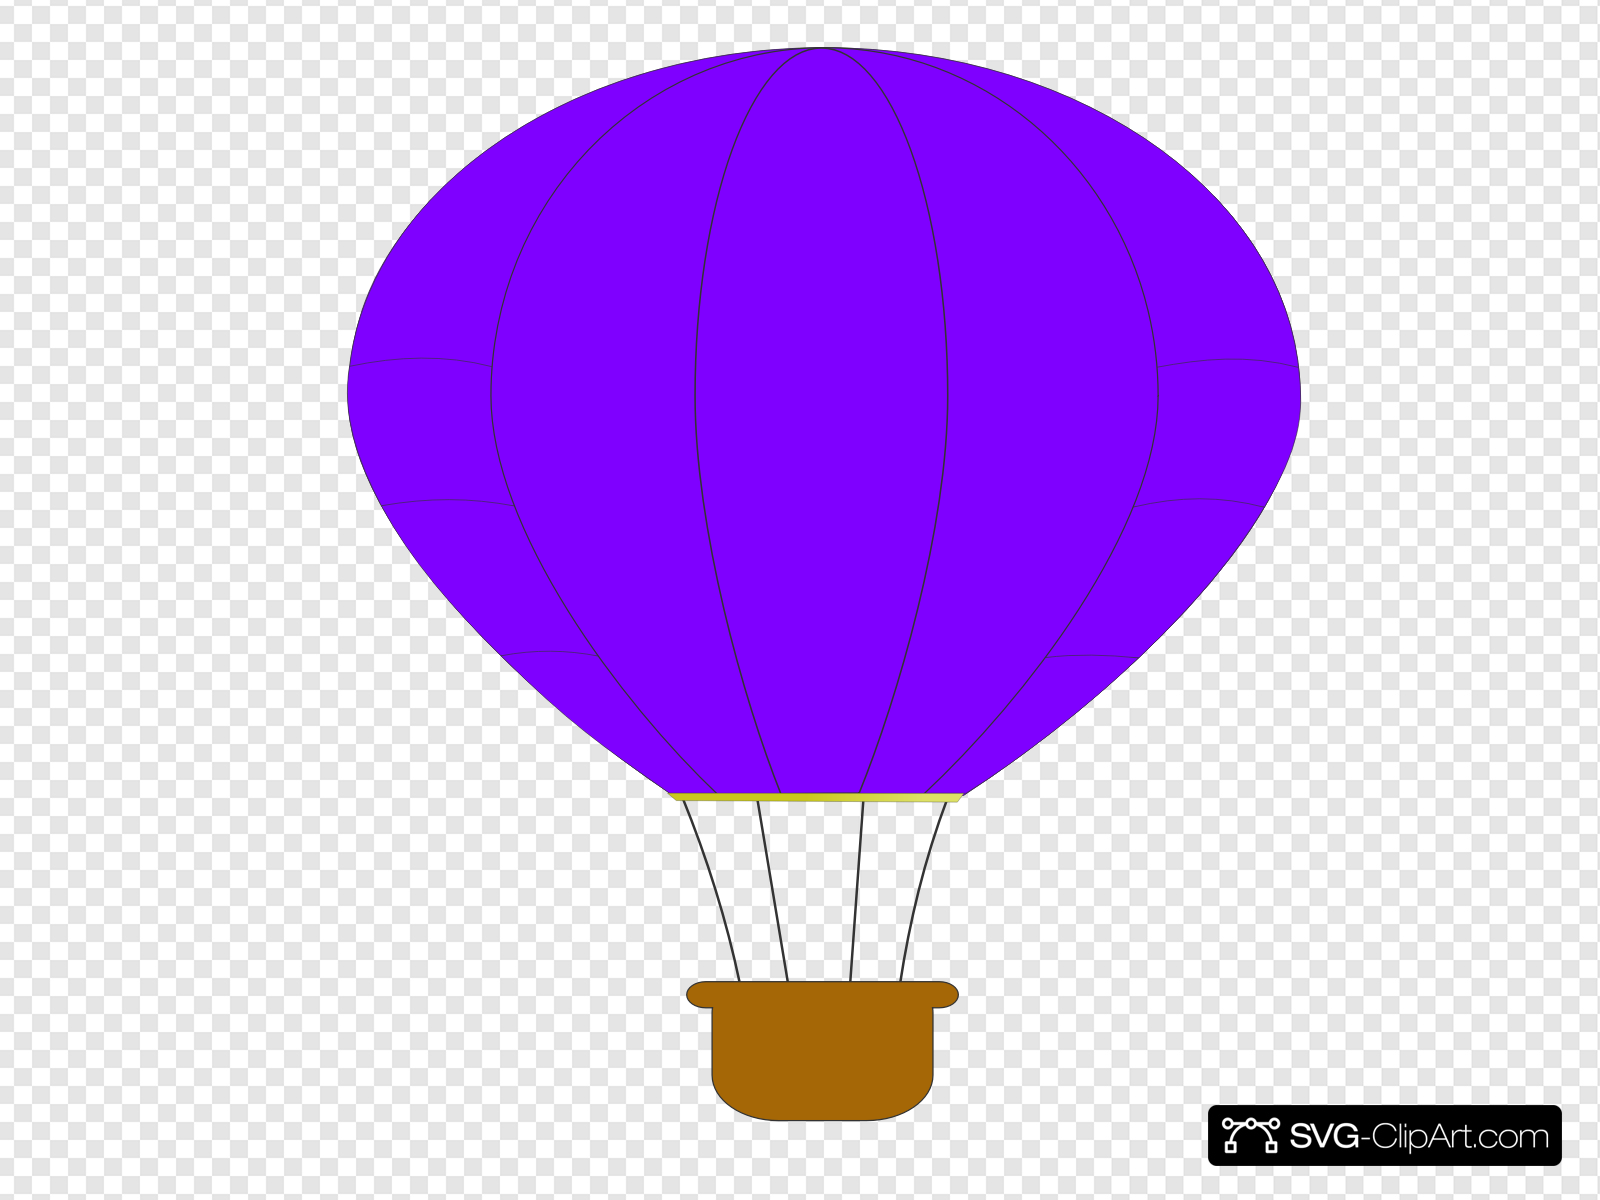 Purple Hot Air Balloon Clip art, Icon and SVG